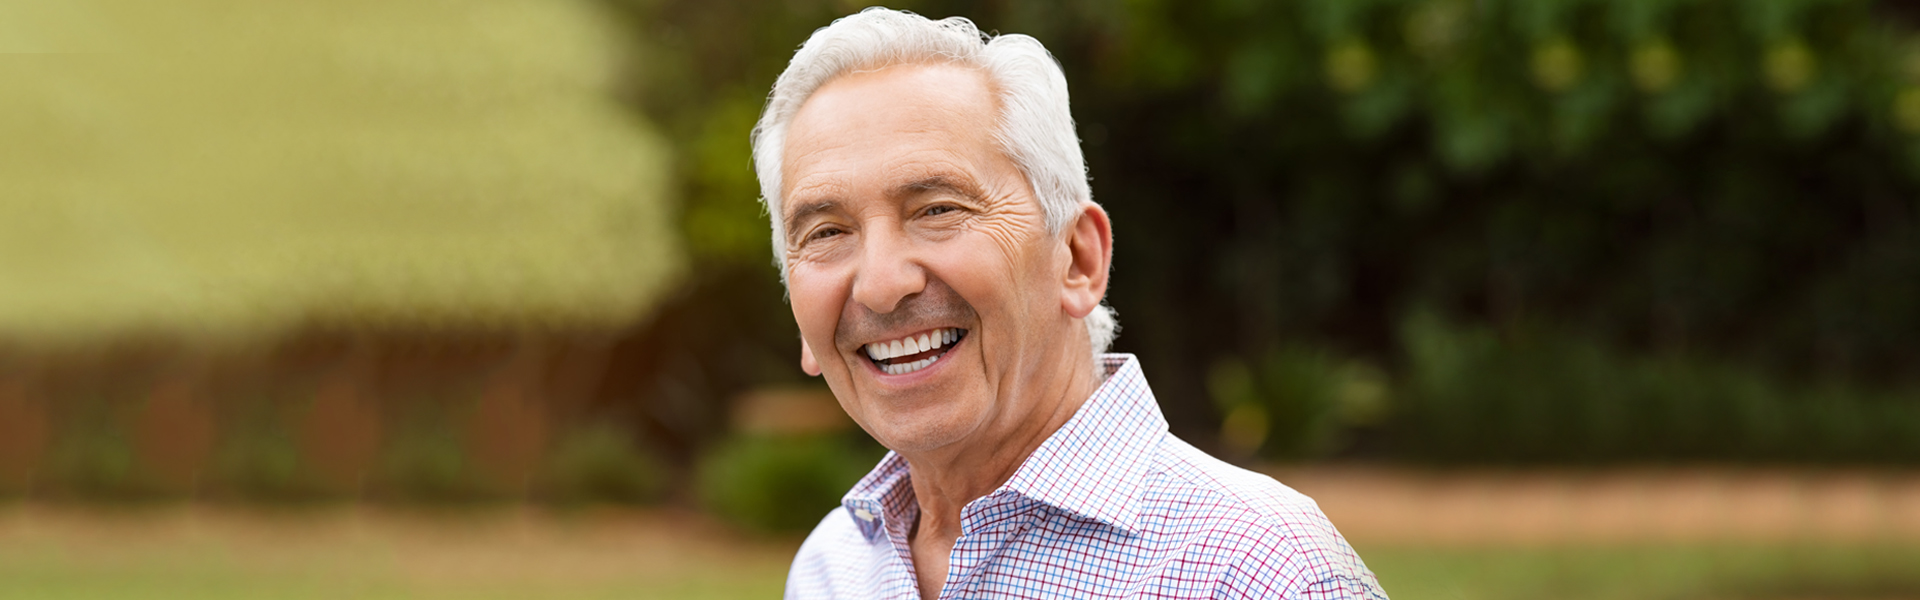 Dentures in Mississauga, ON